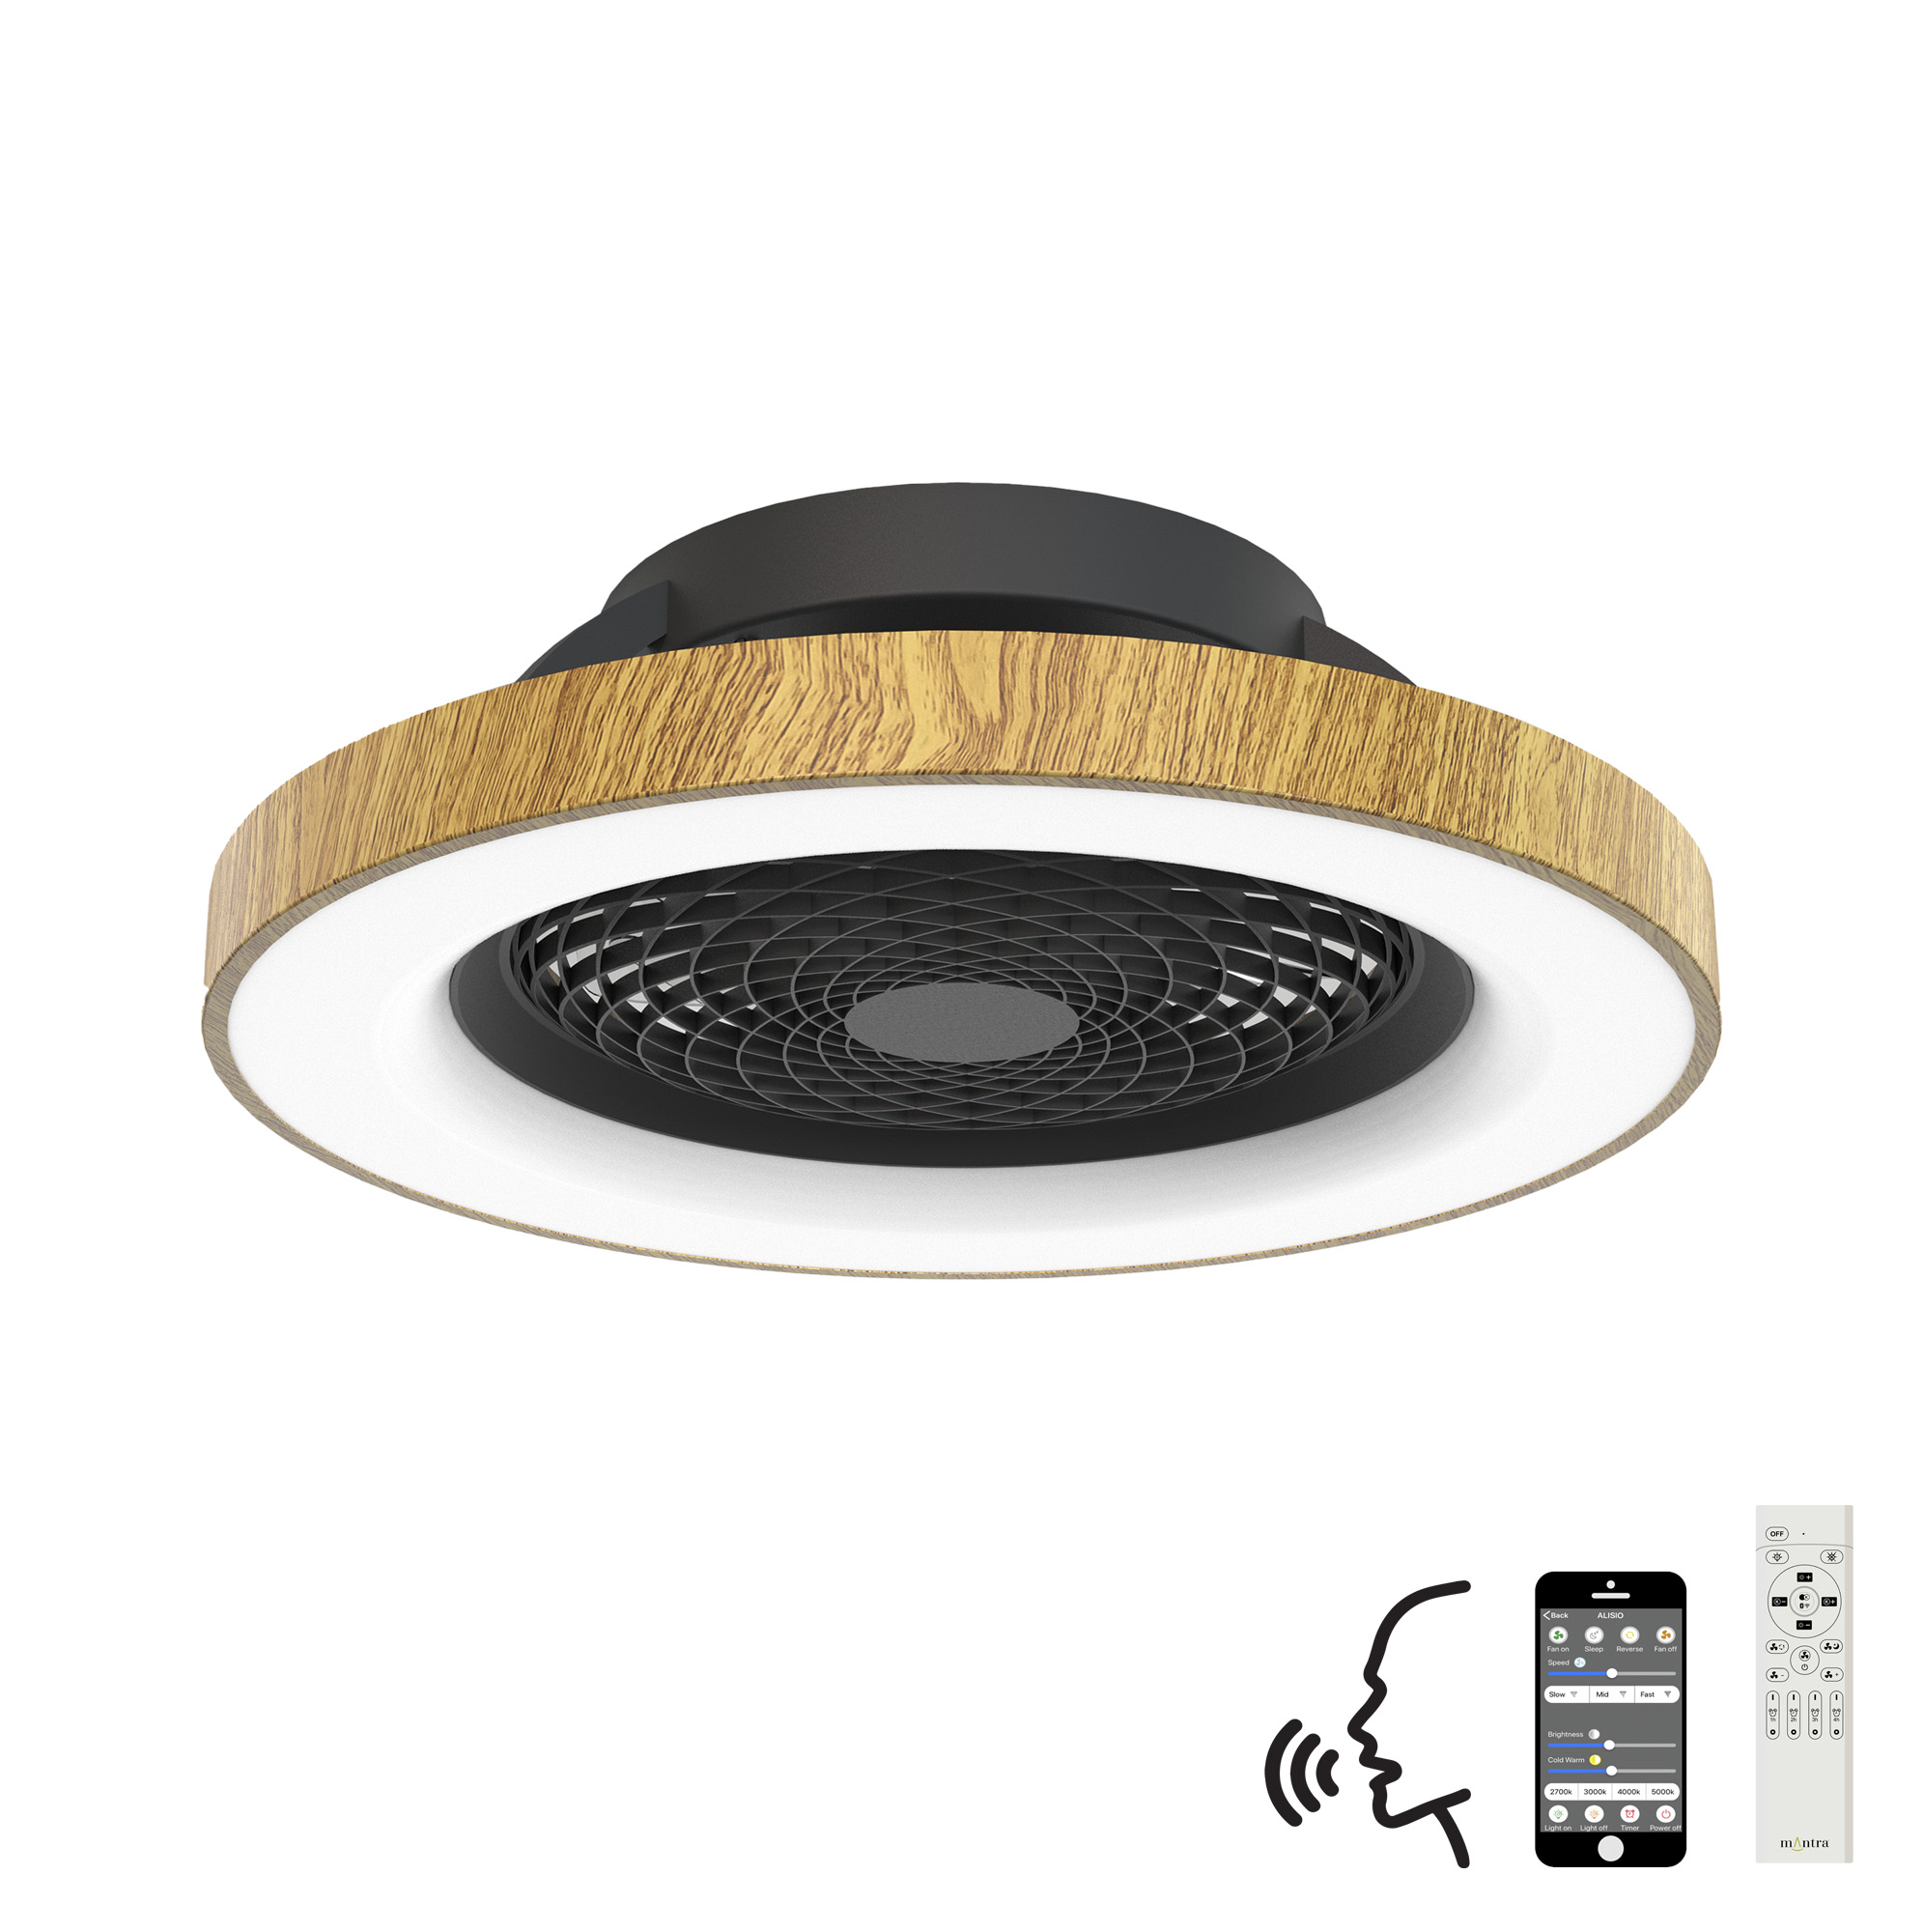 M7127  Tibet 70W LED Dimmable Ceiling Light & Fan, Remote / APP / Voice Controlled Wood Effect/Black